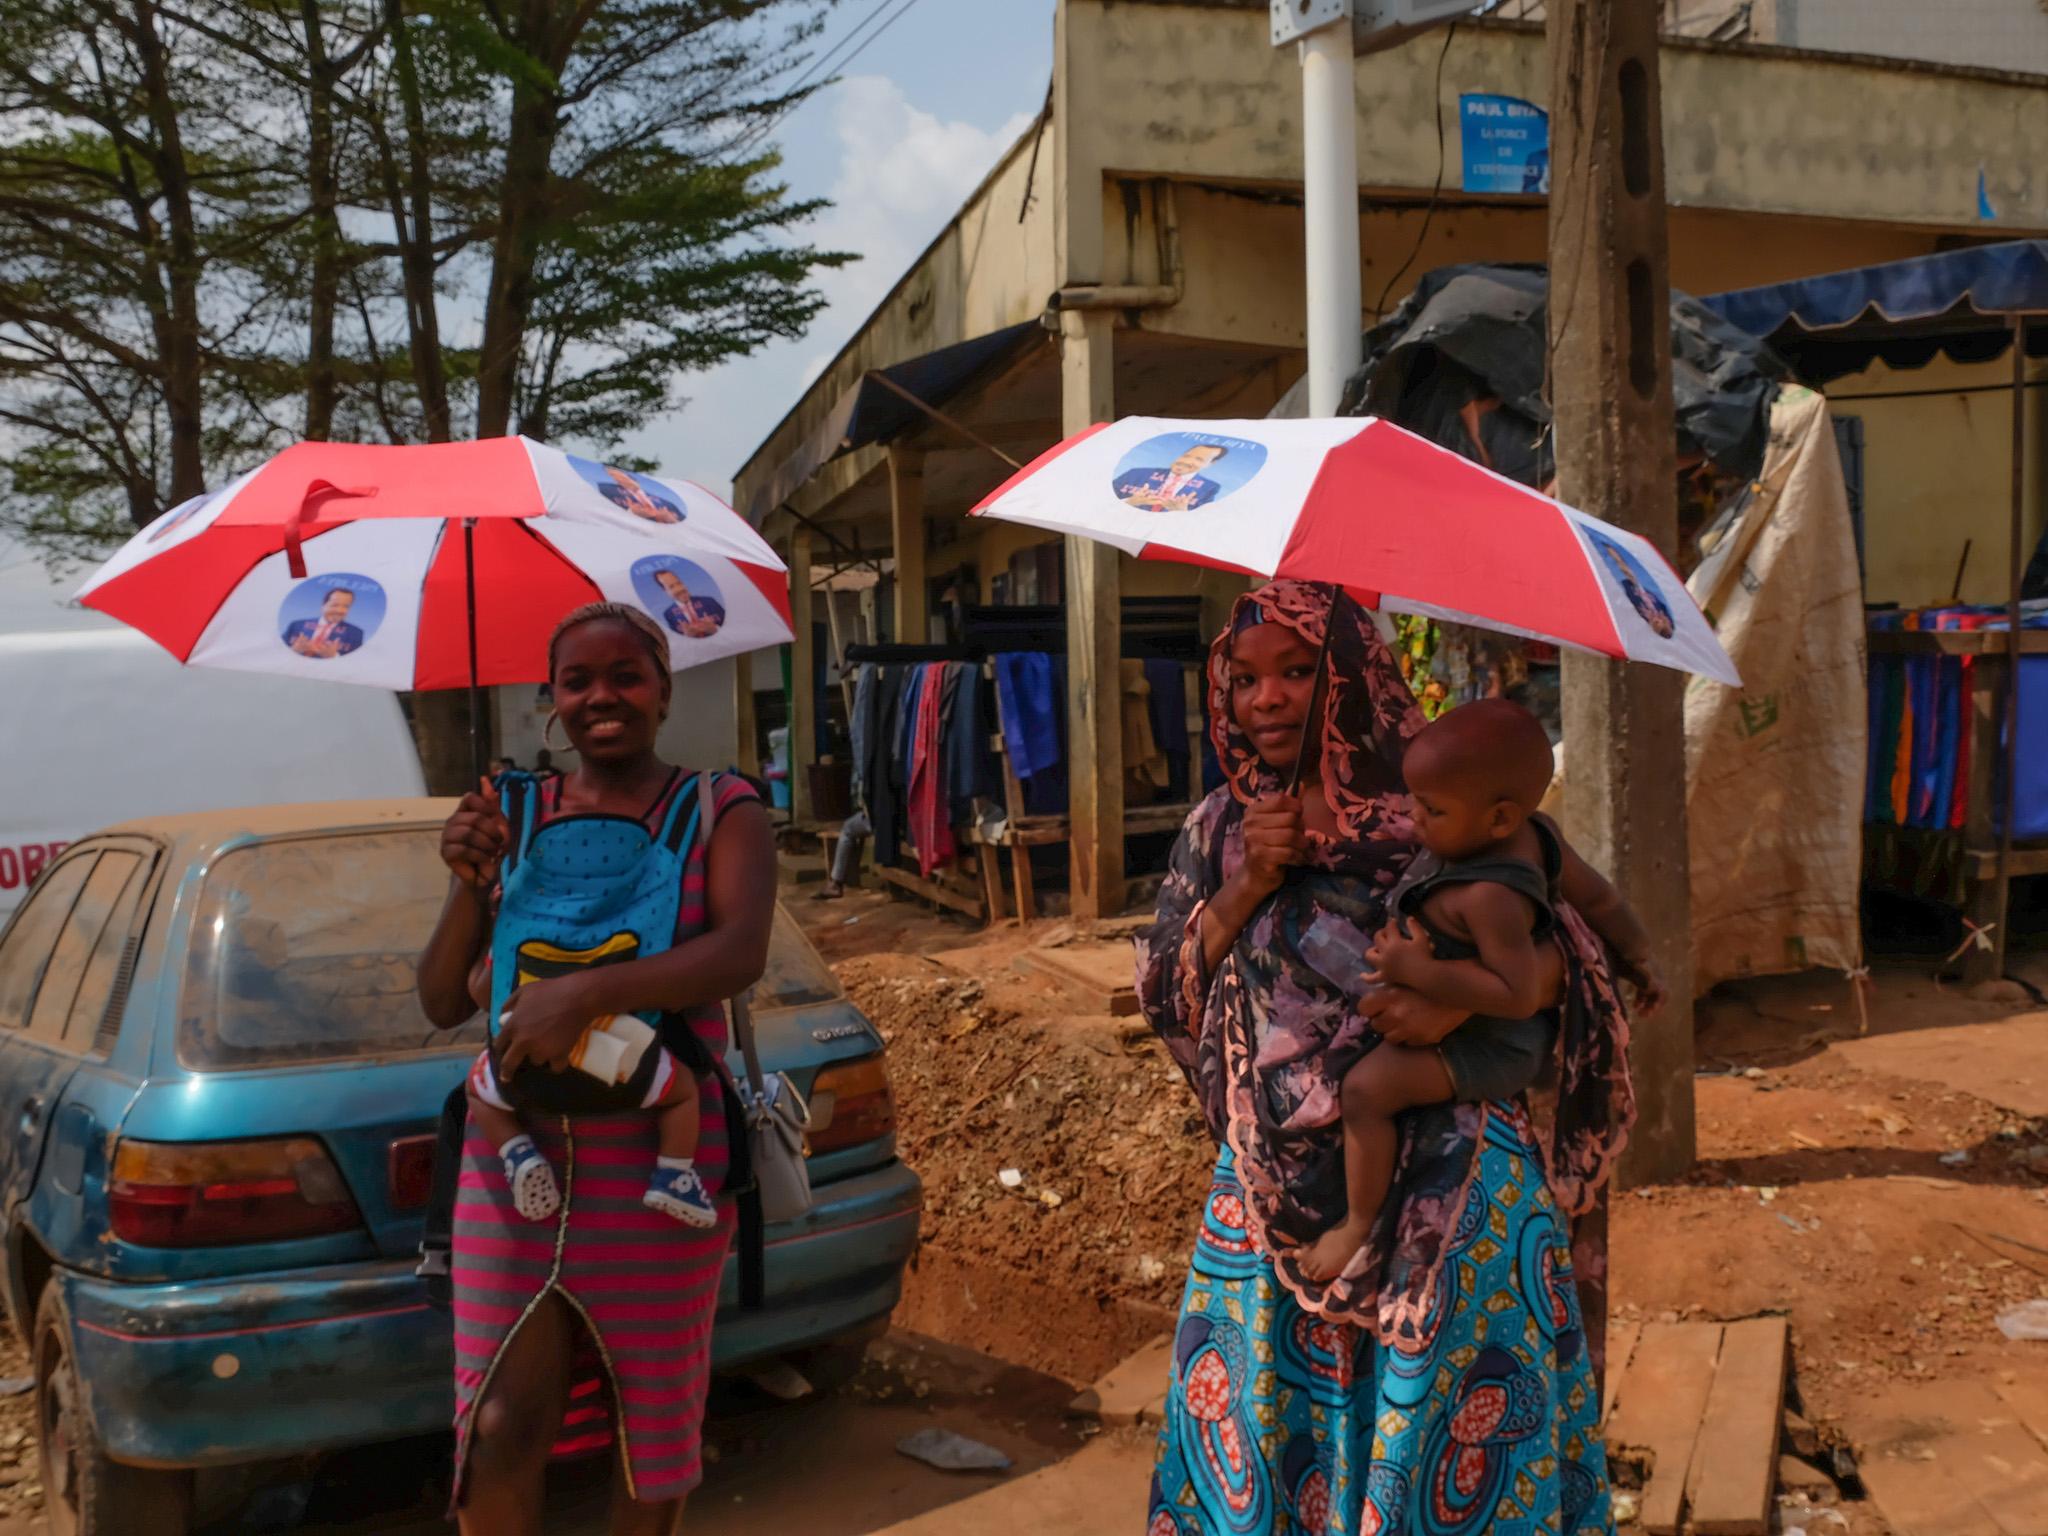 Women in Yaounde, Cameroon, carry umbrellas they received as campaign handouts featuring Paul Biya, president since 1982